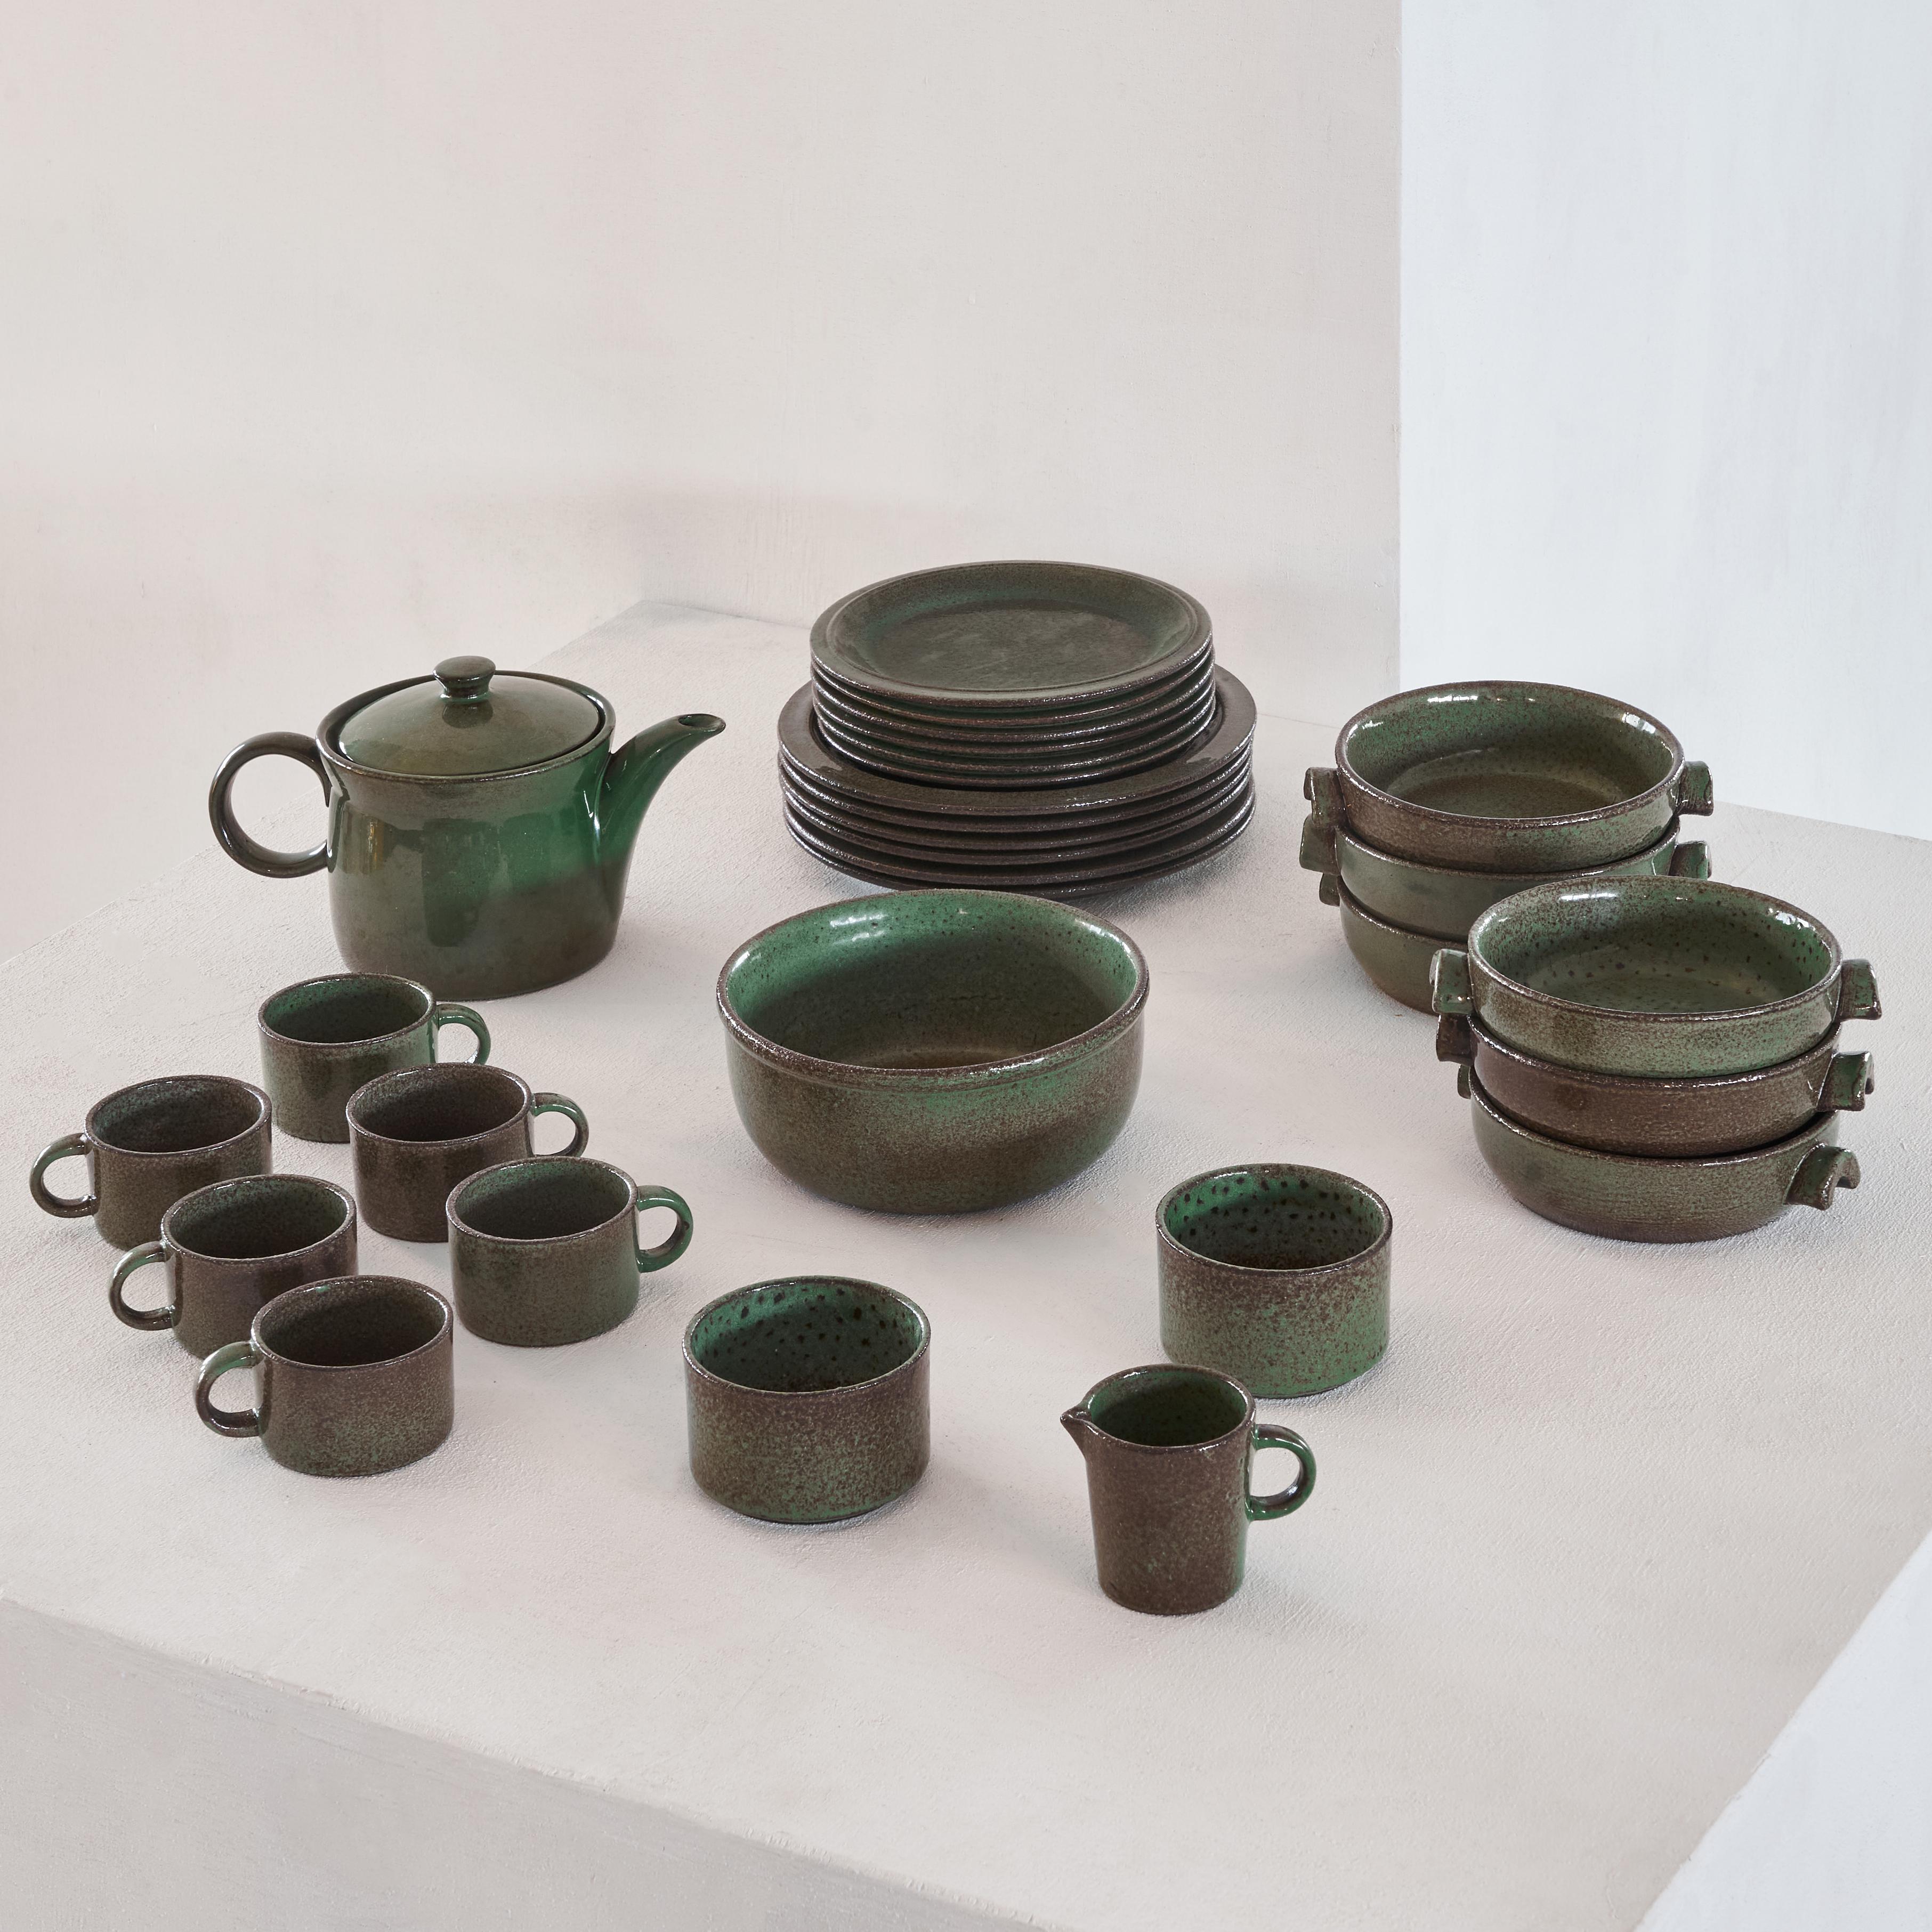 Wonderful Mid-Century Modern dinnerware set in pottery and green and brown glaze. The set contains 30 pieces and could be used for 6 persons. 

This dinnerware set is a joy for your eyes, since the clear shapes and the glazing are very